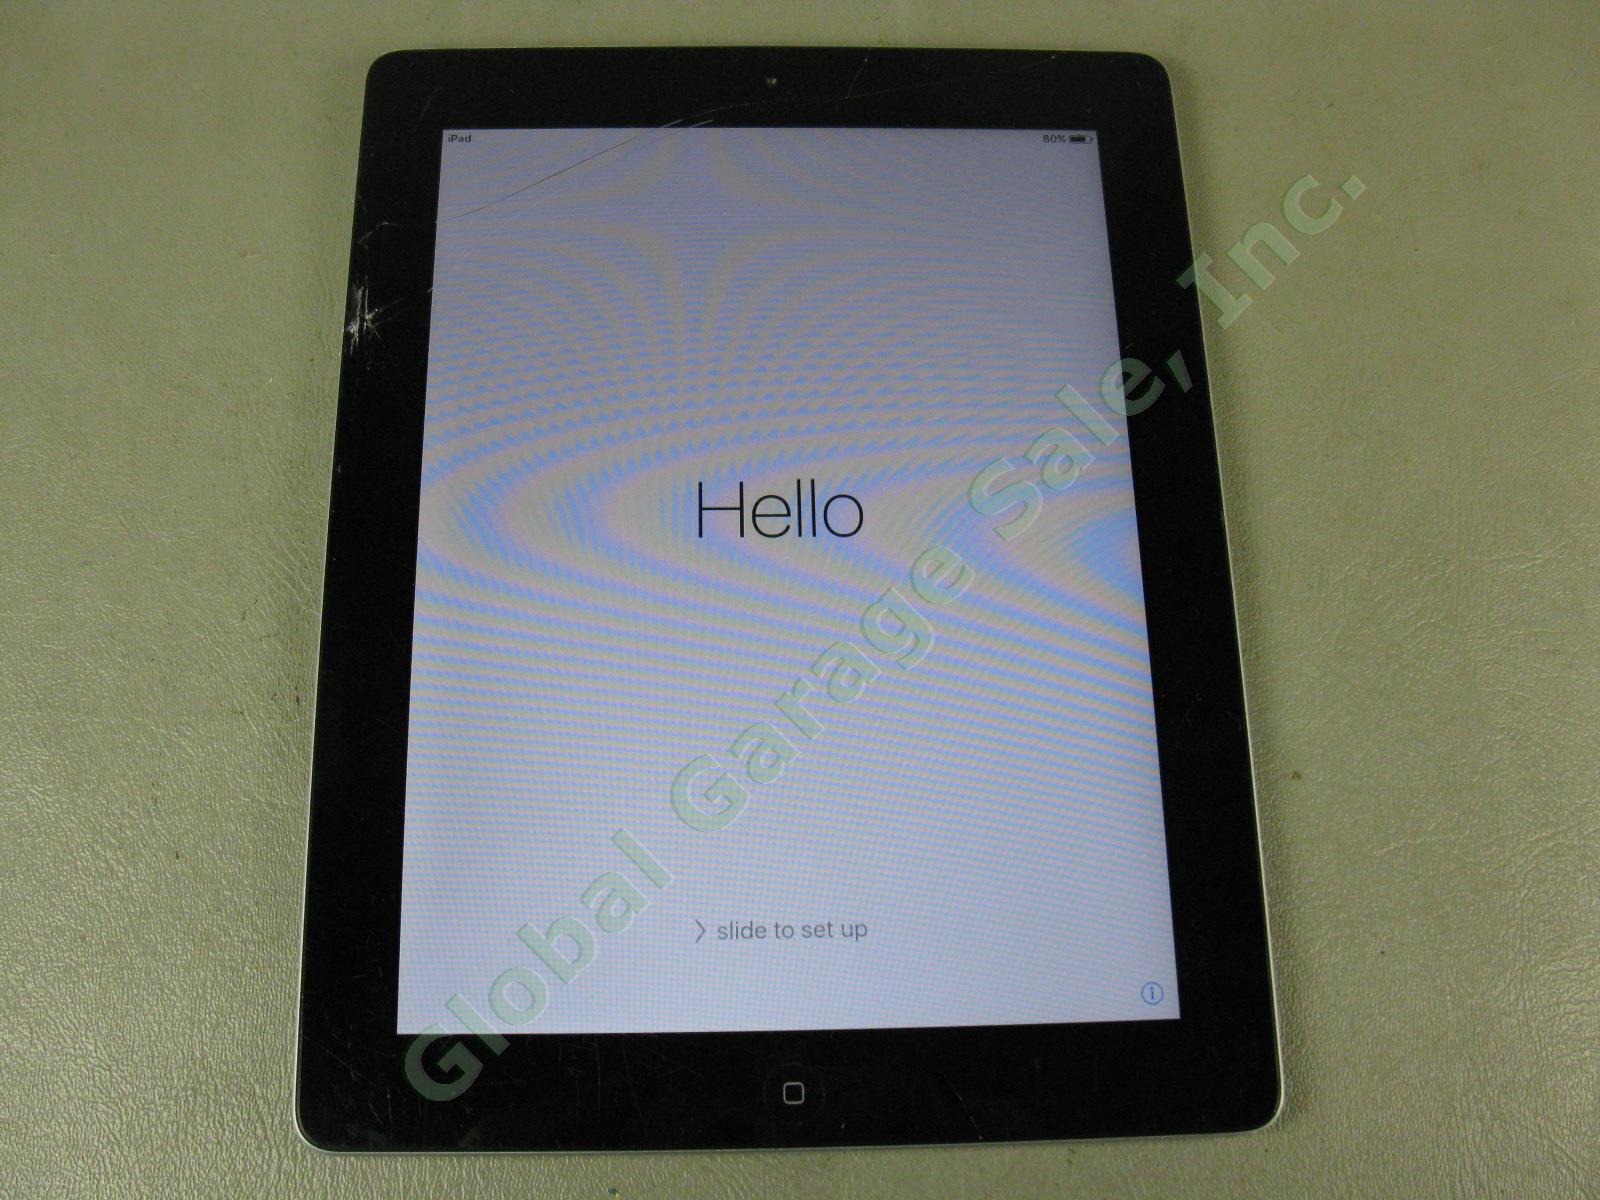 Apple iPad 2 Wifi 32GB Tablet Factory Reset Works Great Cracked Screen A1395 NR!